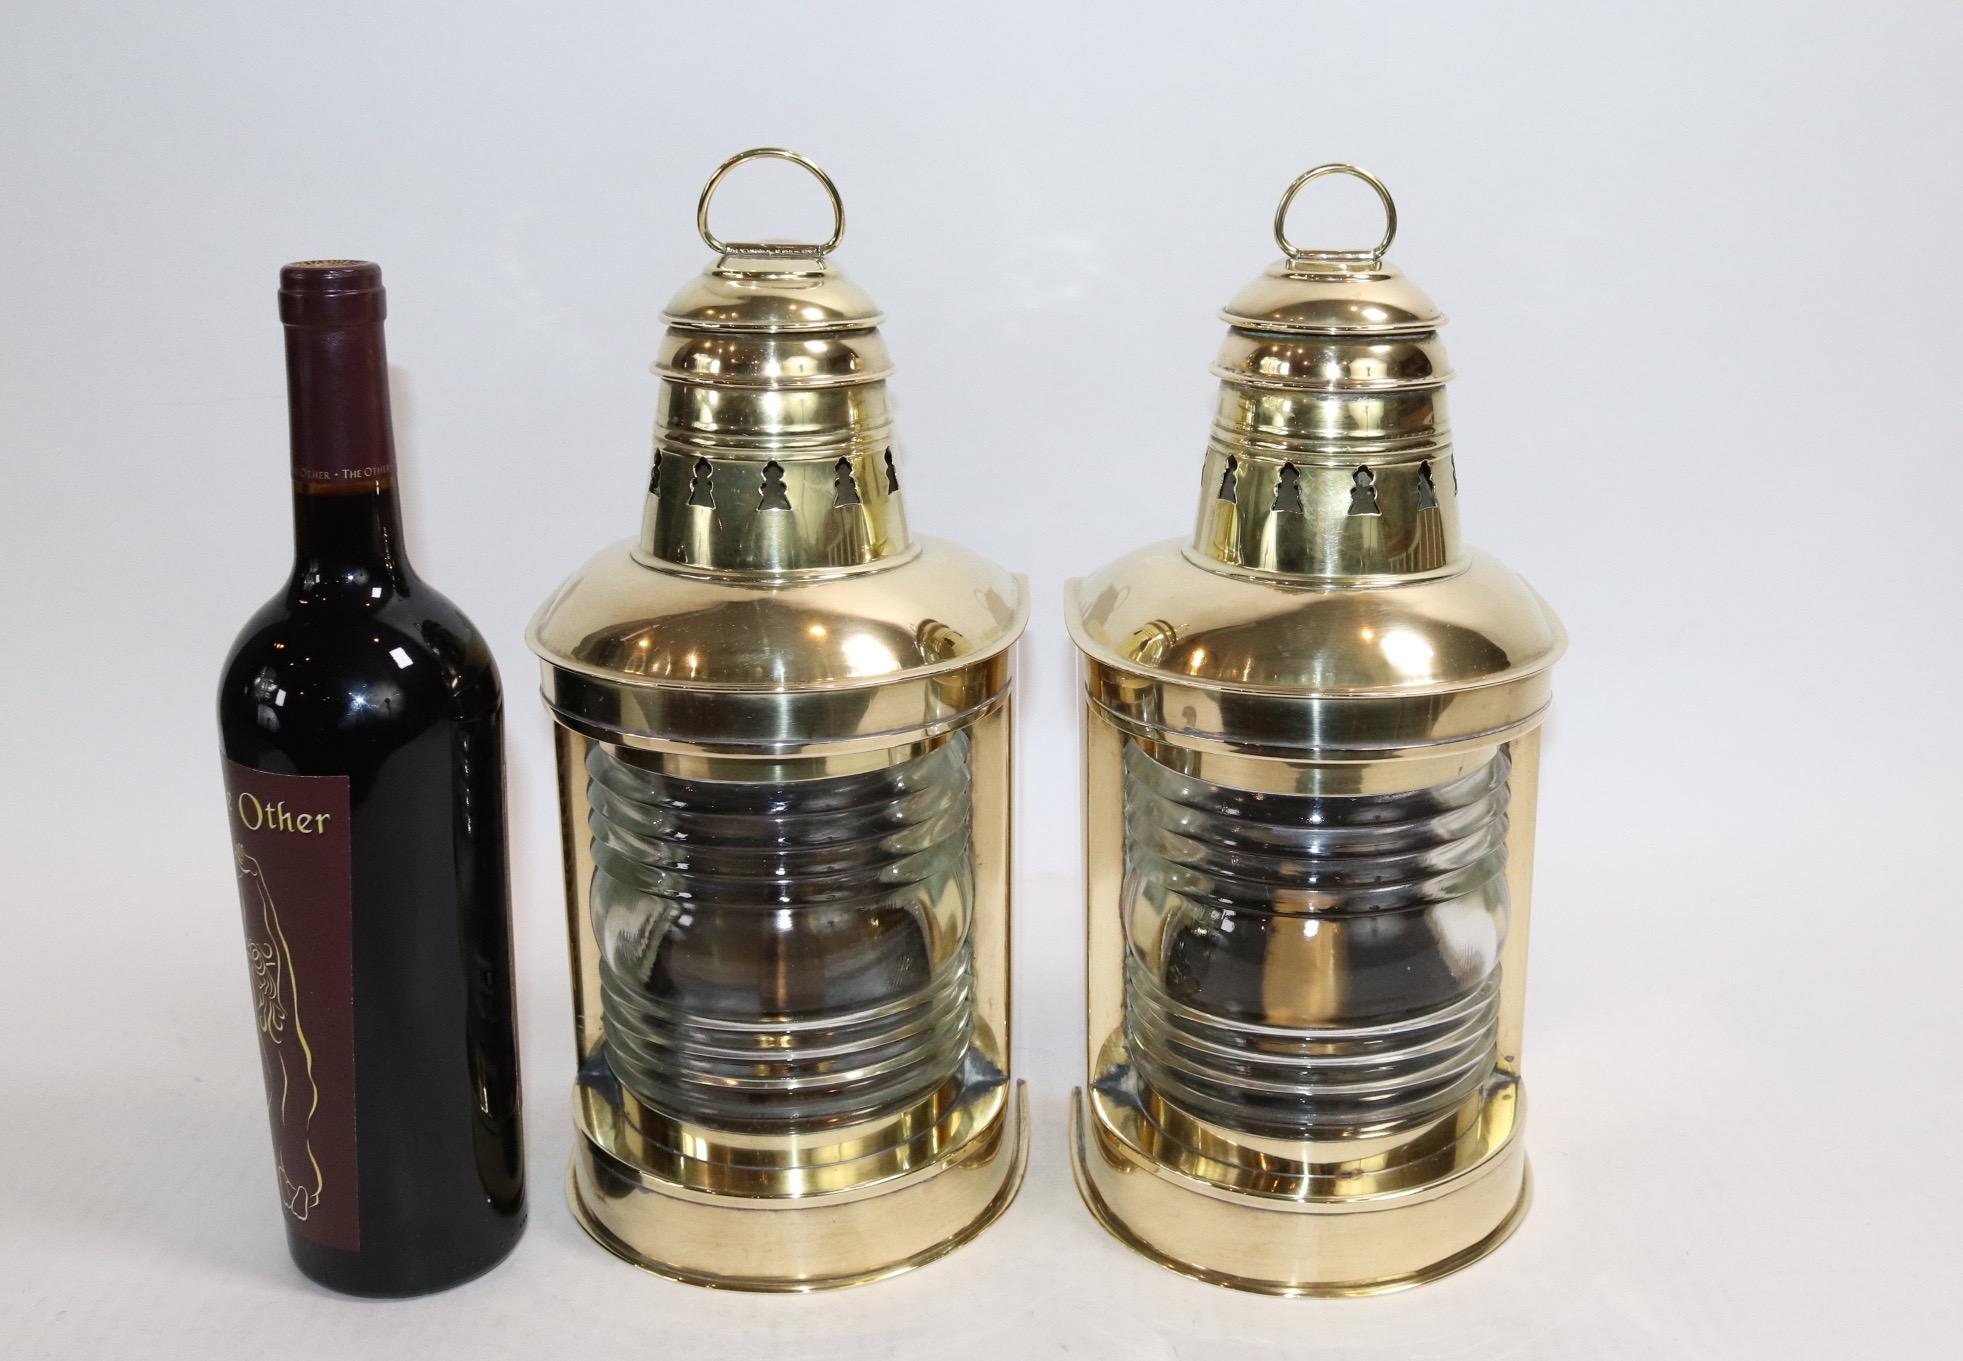 Pair of polished and lacquered Perko masthead ships lanterns with fresnel lenses, carry rings, vented tops, burners and mounting flanges. Weight is 8 pounds.